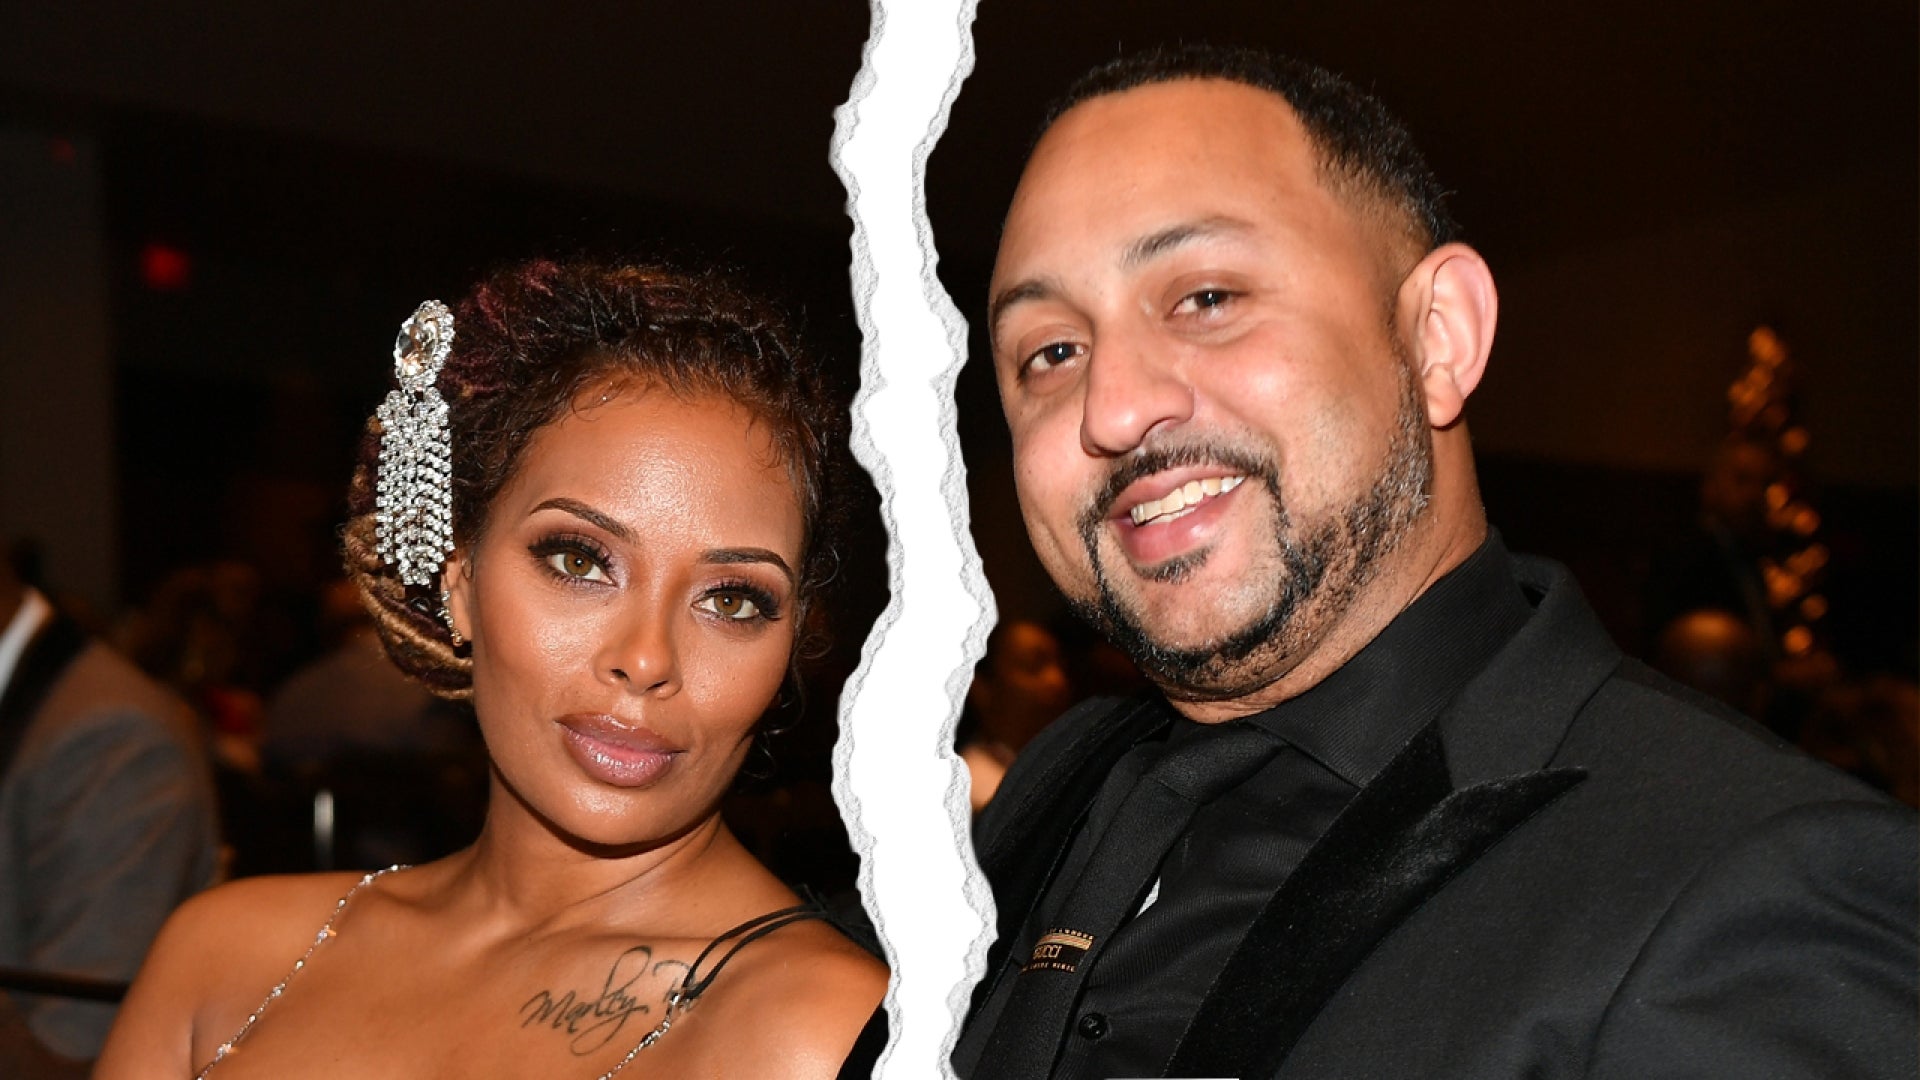 'RHOA's Eva Marcille Files for Divorce From Michael Sterling After 4 Years of Marriage